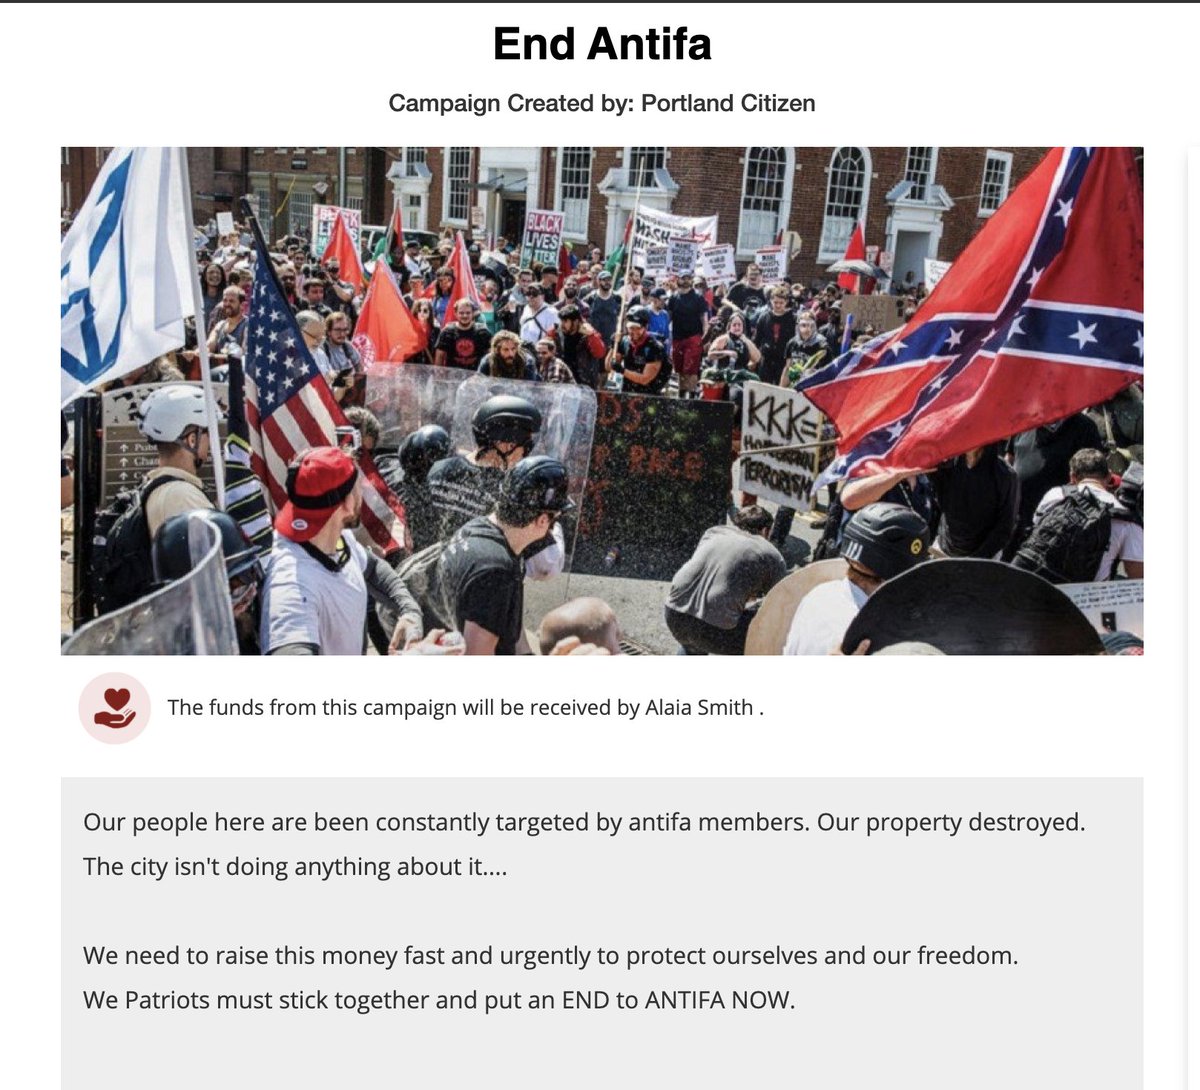  @stripe is also the payment processor for this  @givesendgo fundraiser seeking $156,000 to "end antifa" by unspecified means. the person raising the funds traveled from vancouver, WA to kenosha in the days after the rittenhouse murders to participate in the ensuing unrest.